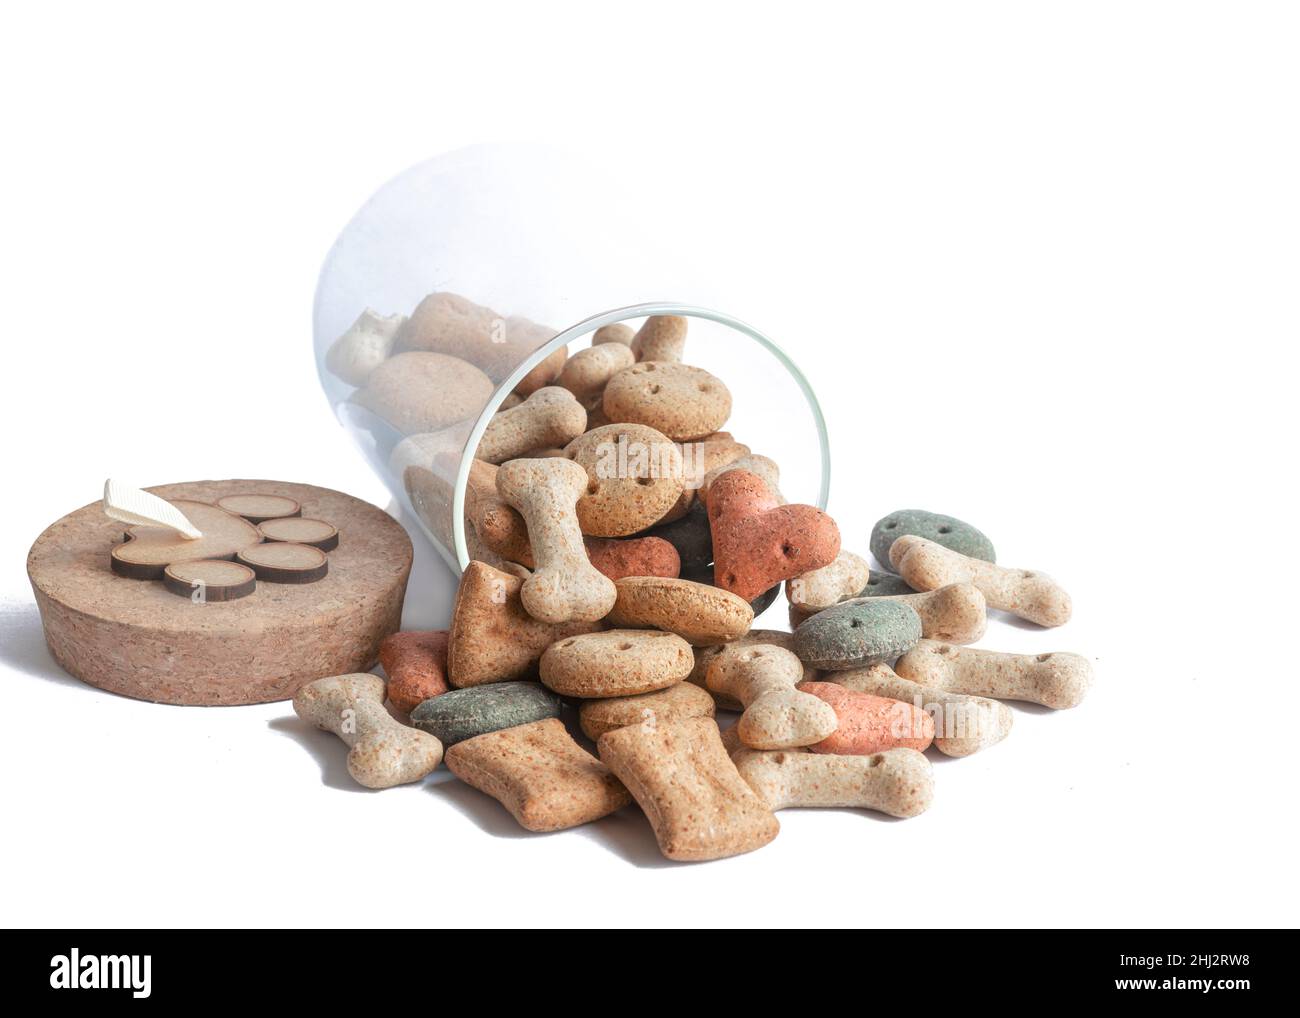 Different coloured and shaped dog treats or biscuit in a glass jar with lid shot on a white background Stock Photo